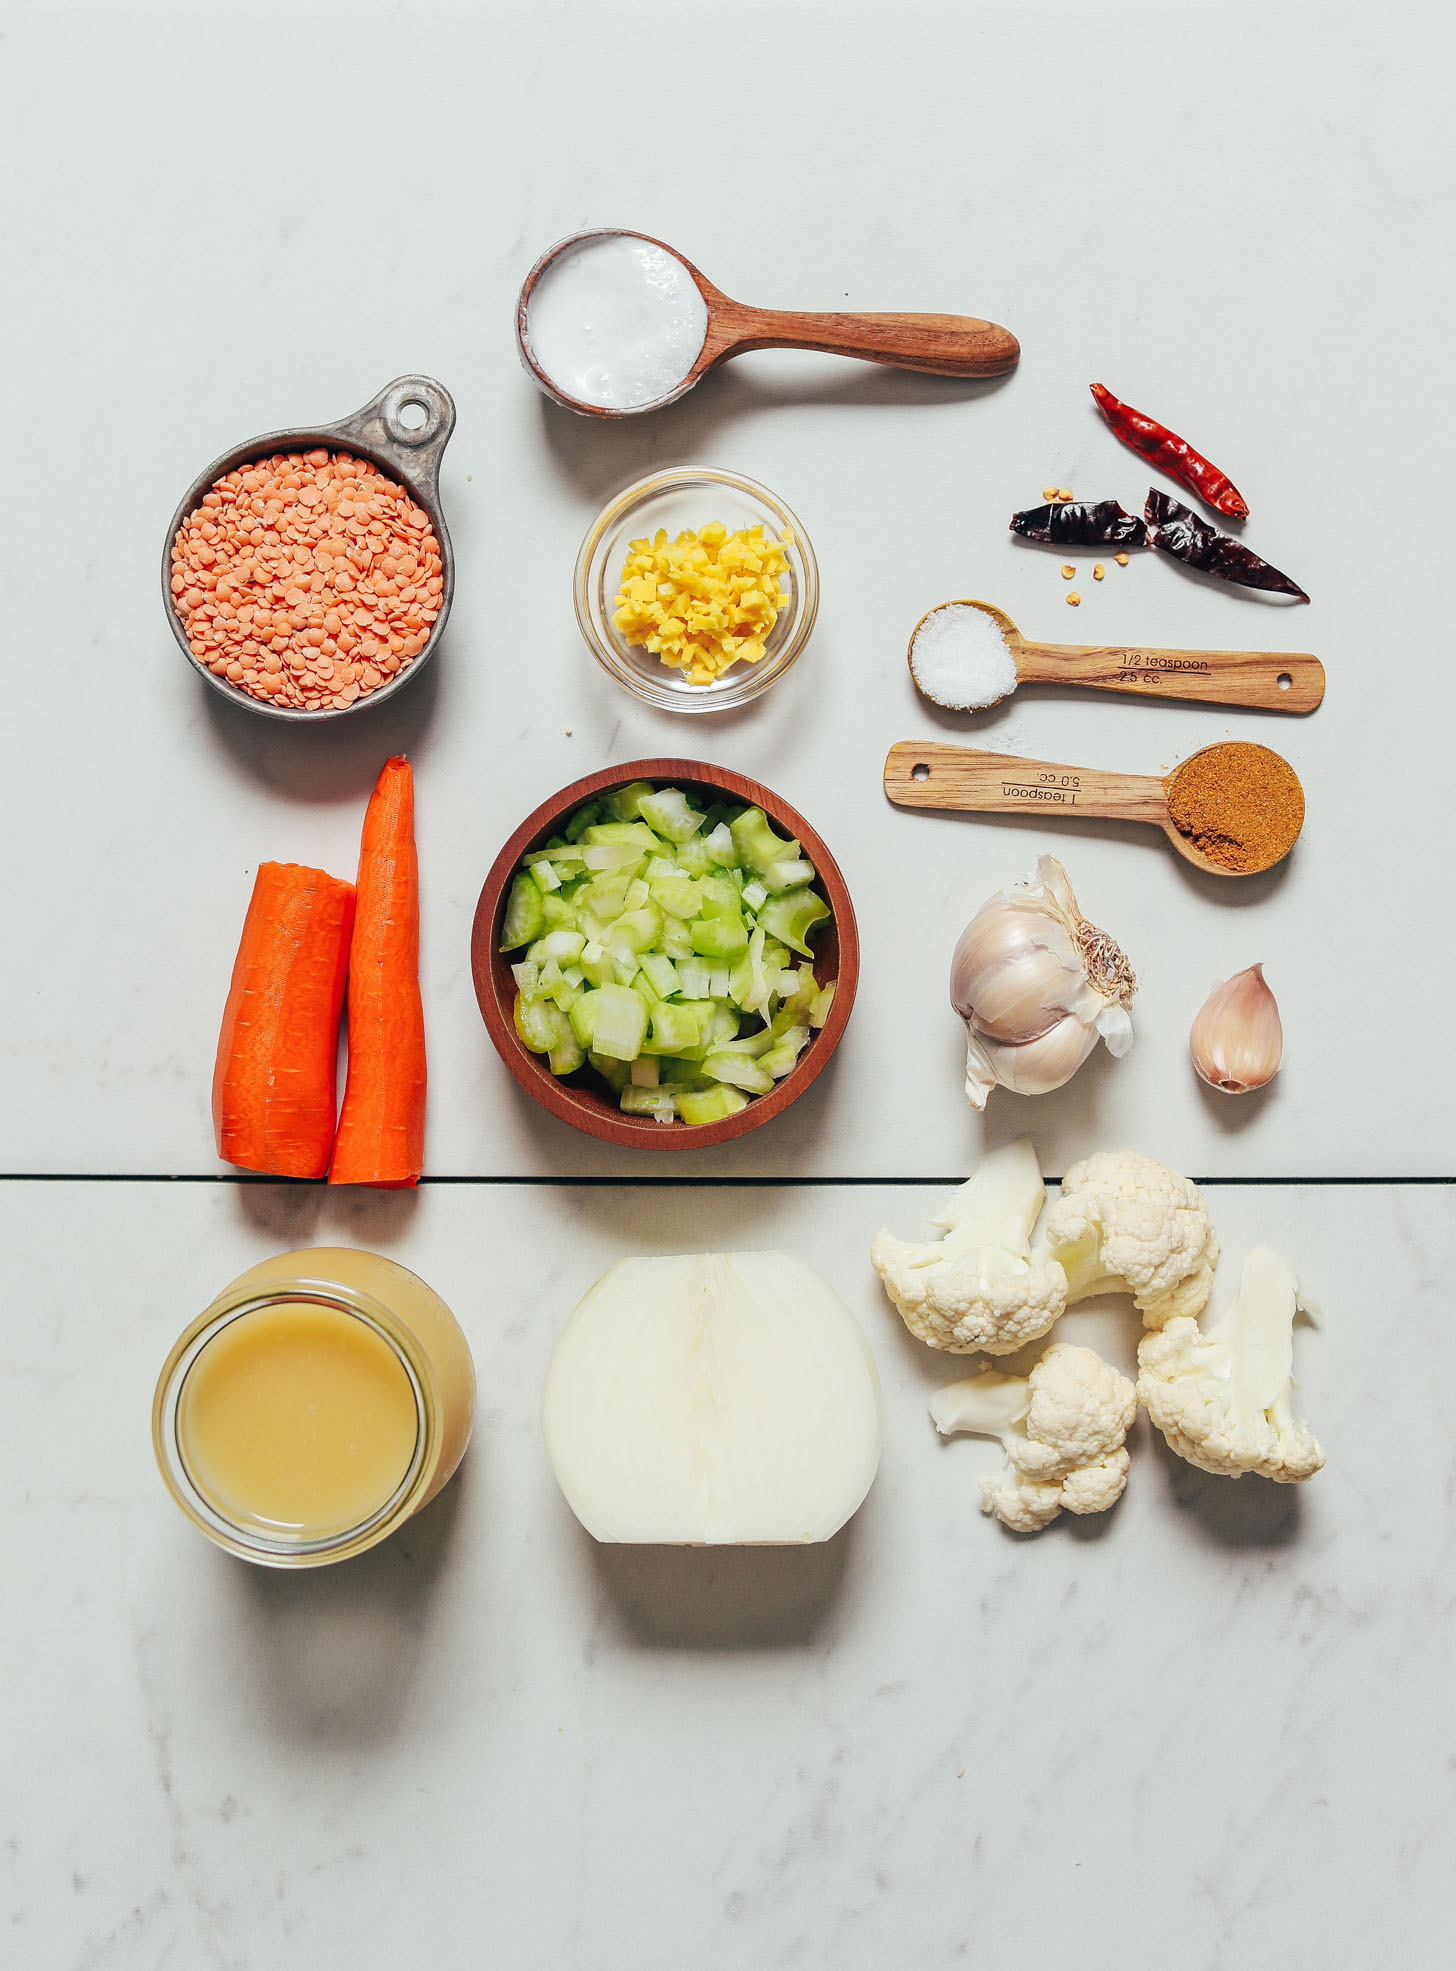 Carrots, celery, cauliflower, garlic, and other ingredients for making our Curried Cauliflower Lentil Soup recipe